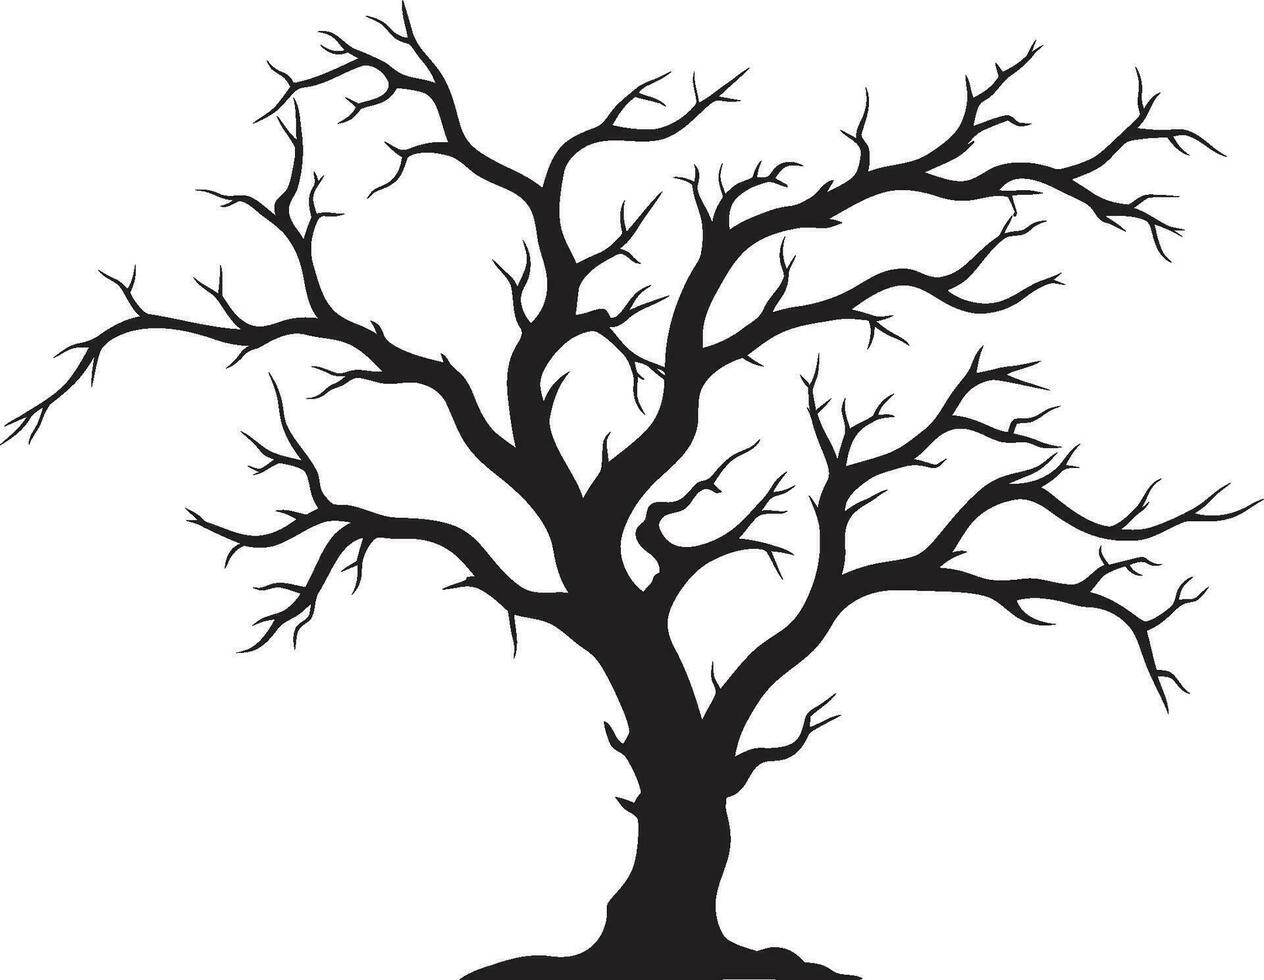 Shadows of Decay Depiction of a Lifeless Tree in Black Eternal Tranquility Monochrome Farewell to Natures Beauty vector